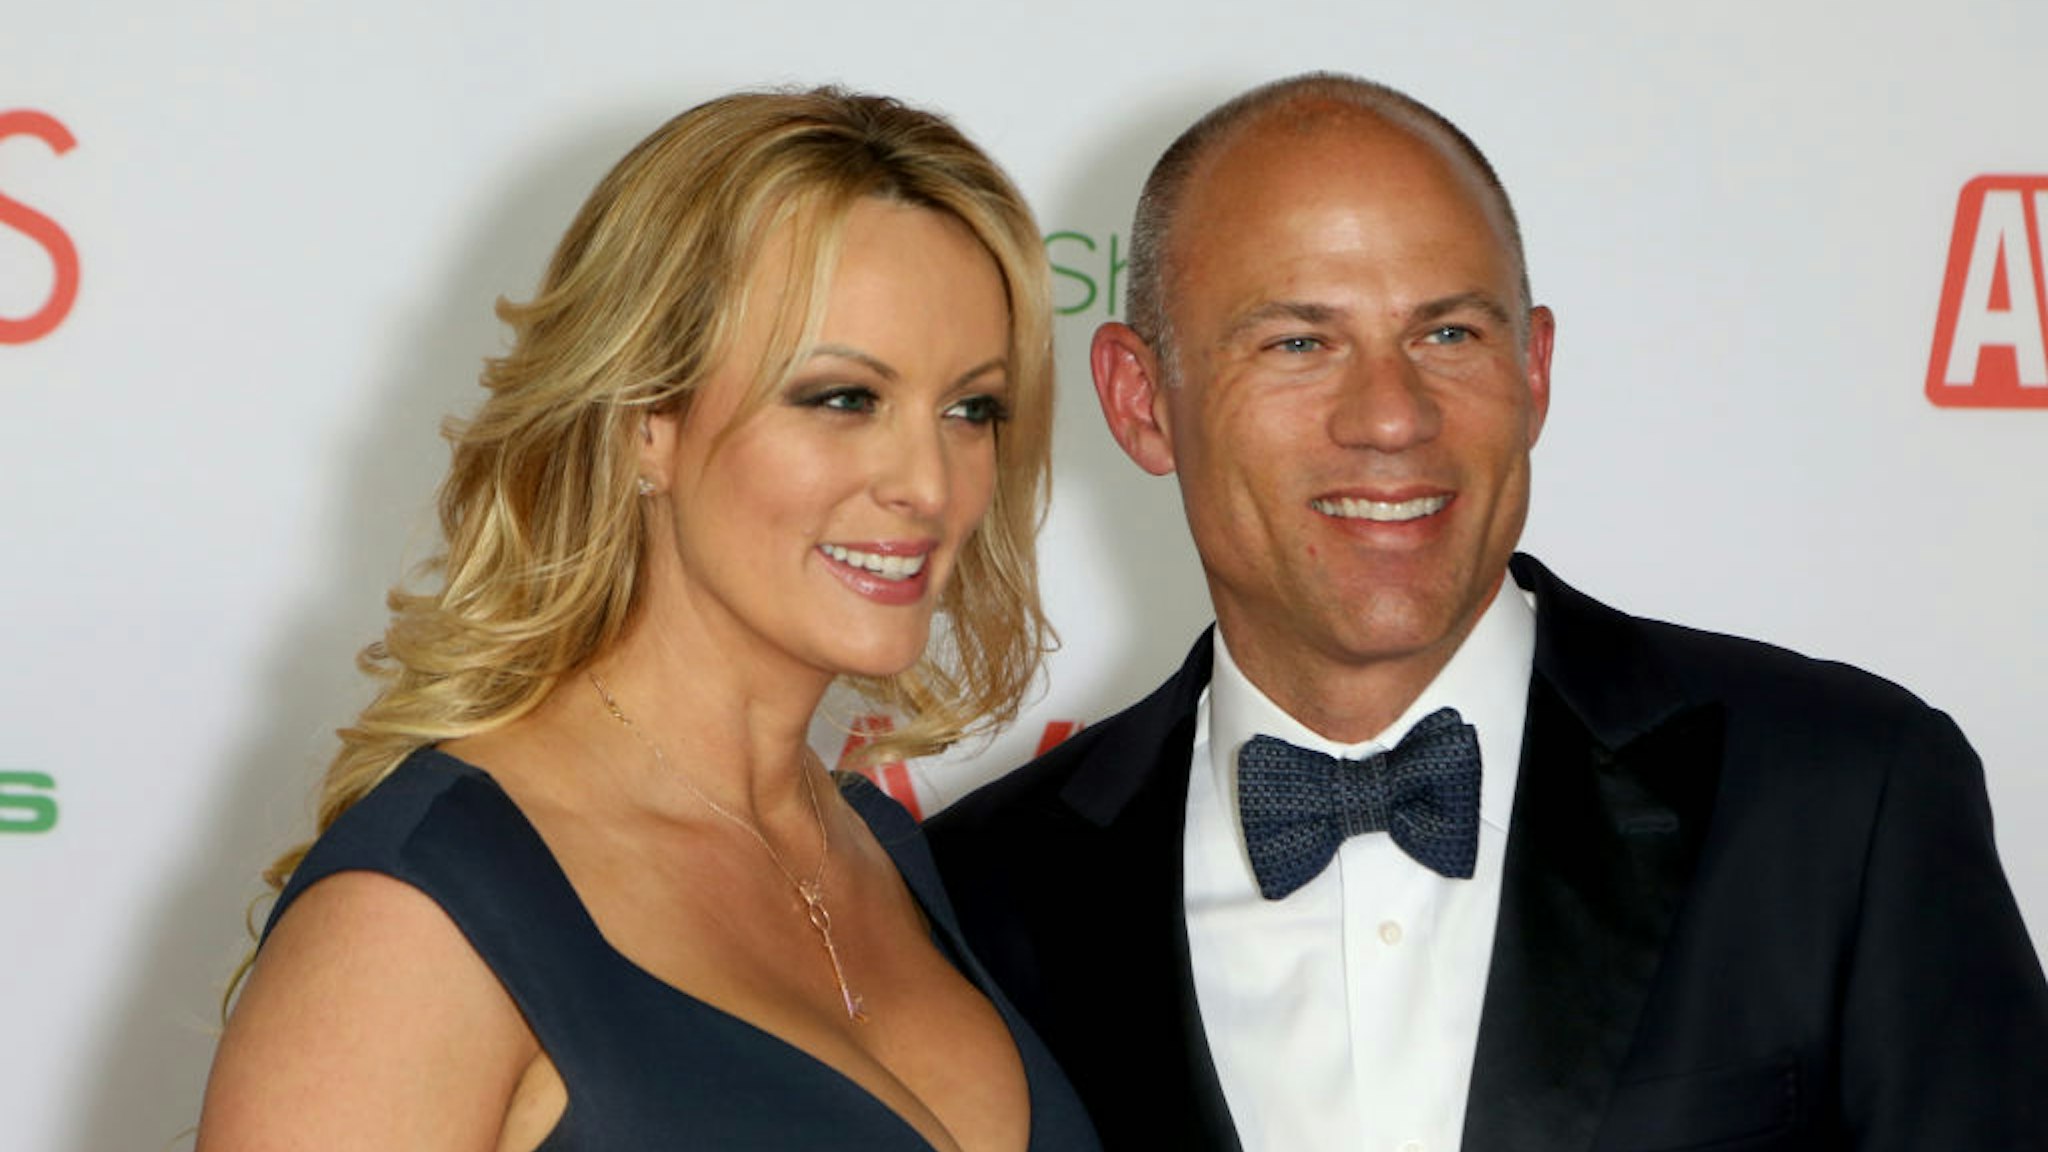 Adult film actress/director Stormy Daniels and attorney Michael Avenatti attend the 2019 Adult Video News Awards at The Joint inside the Hard Rock Hotel &amp; Casino on January 26, 2019 in Las Vegas, Nevada. (Photo by Gabe Ginsberg/Getty Images)